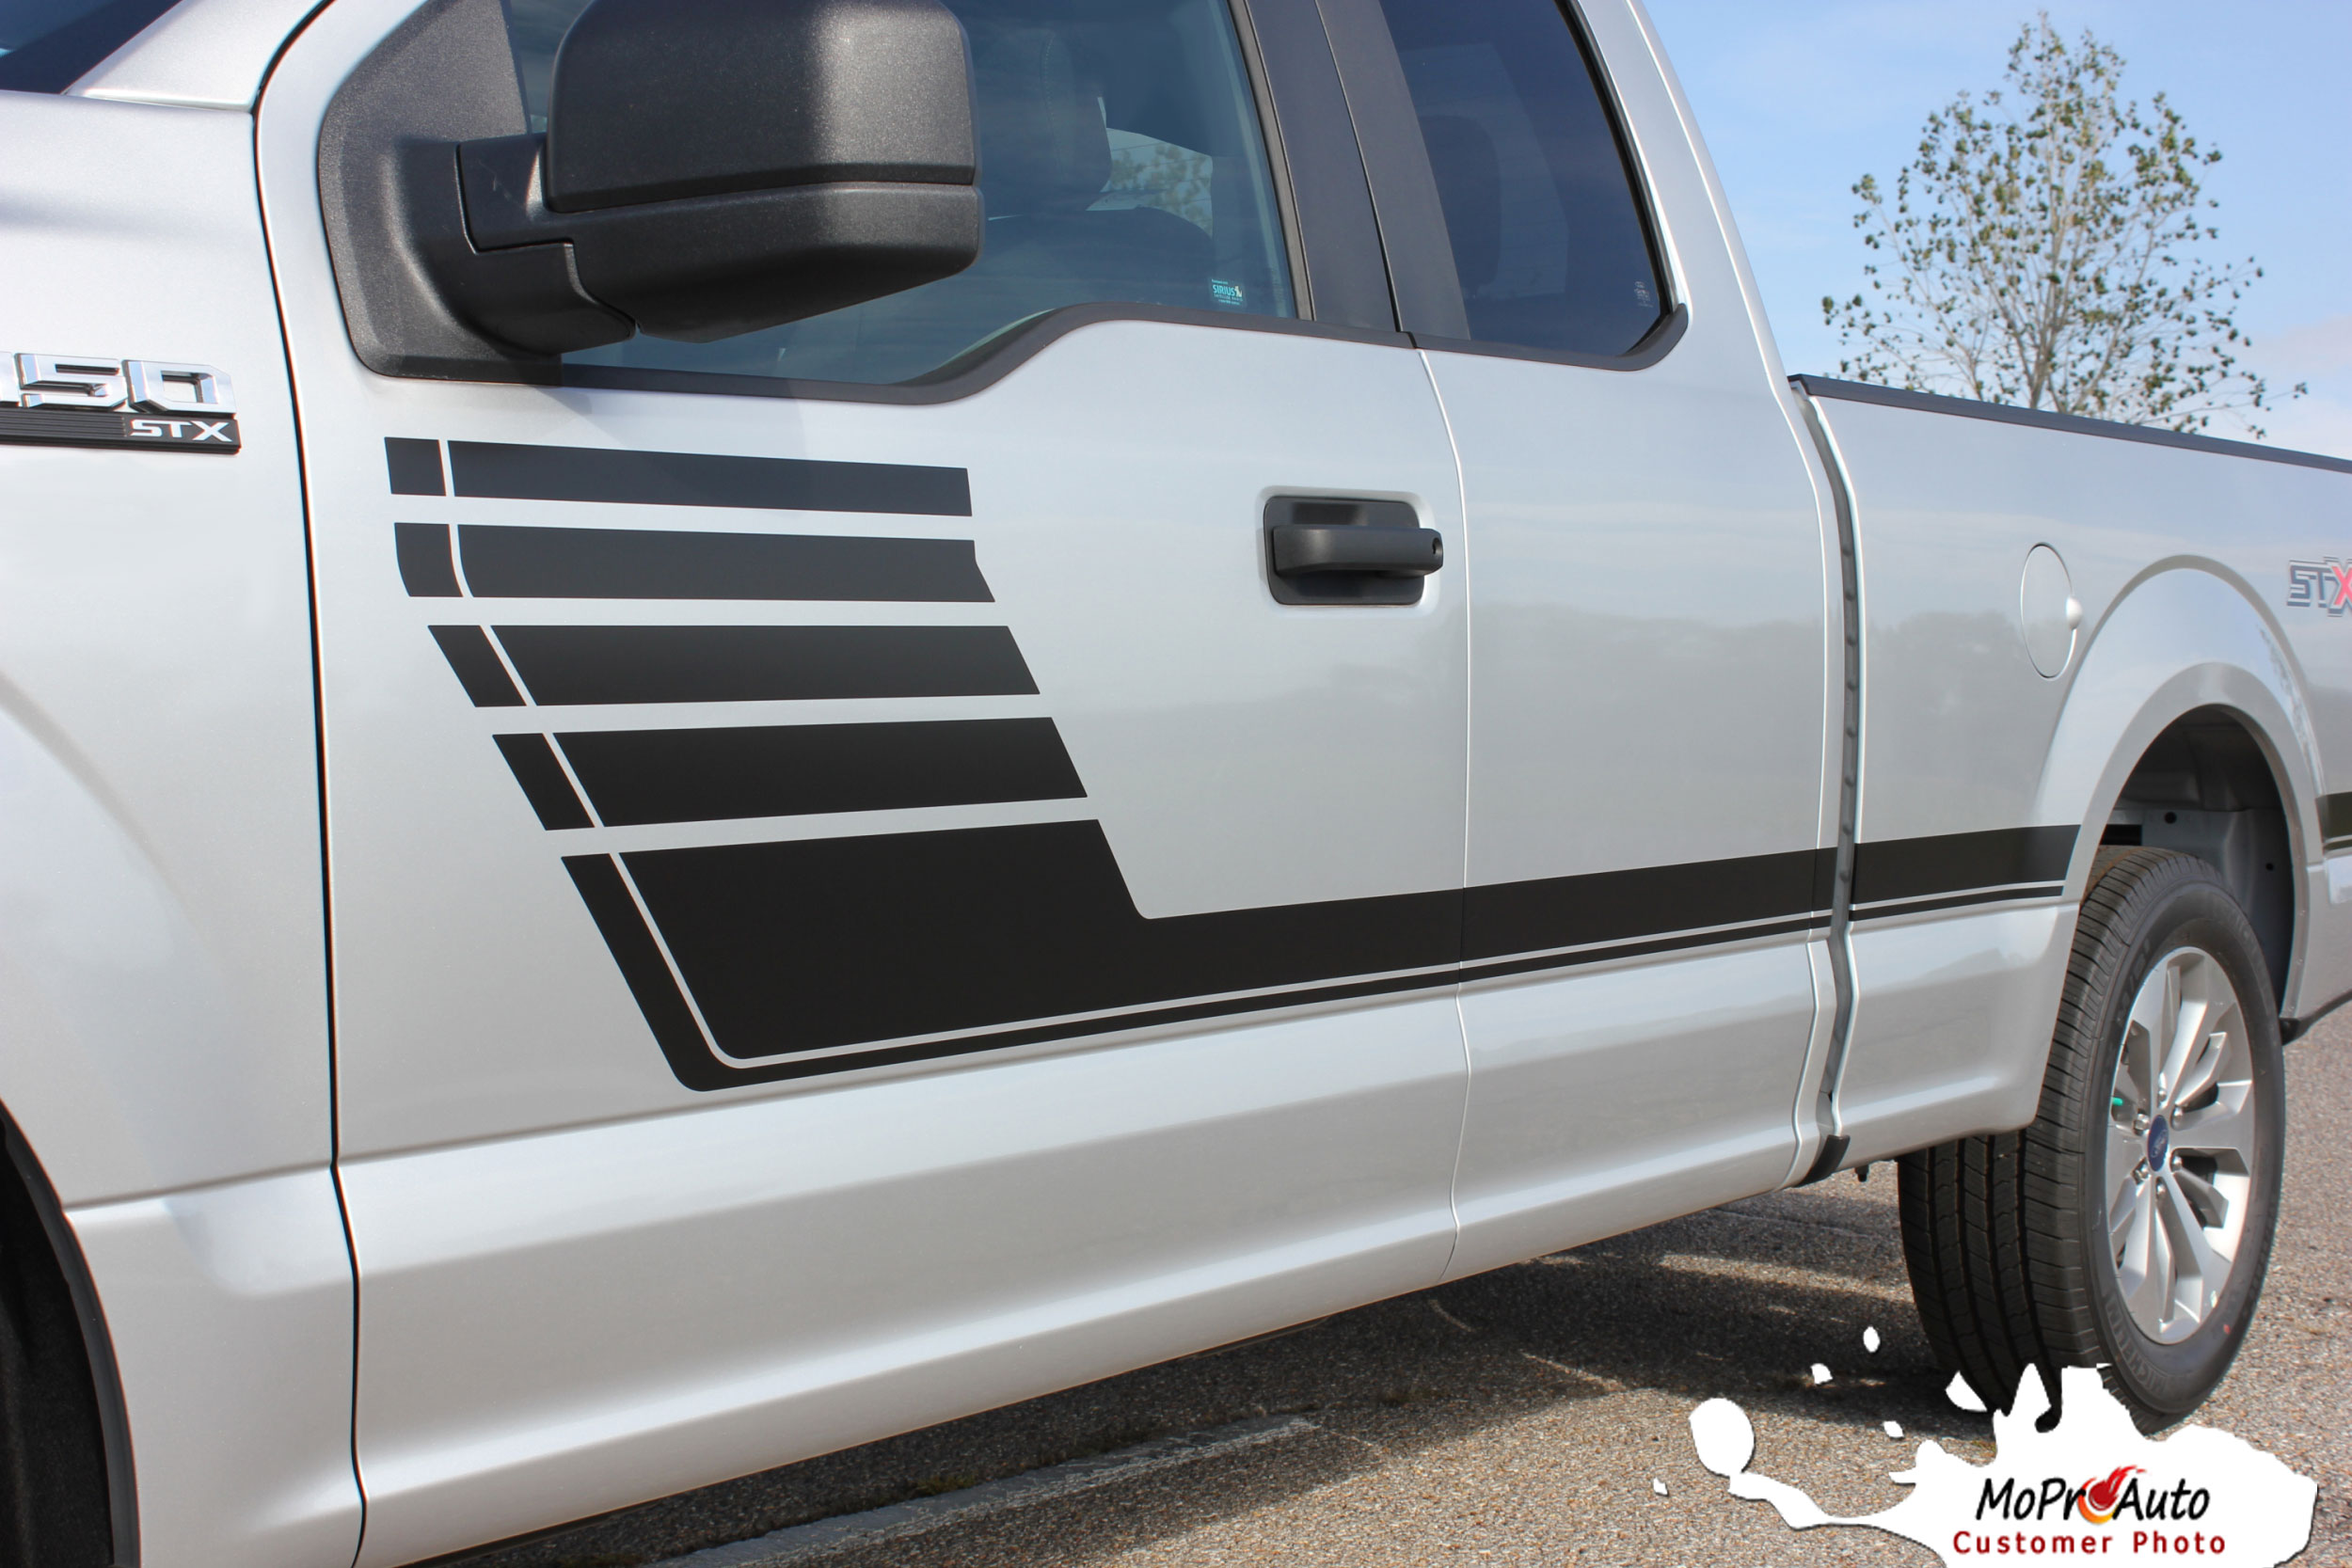 2021, 2022, 2023 SPEEDWAY Special Edition Ford F-Series F-150 Door Hockey Stick Appearance Package Vinyl Graphics and Decals Kit by MoProAuto Pro Design Series